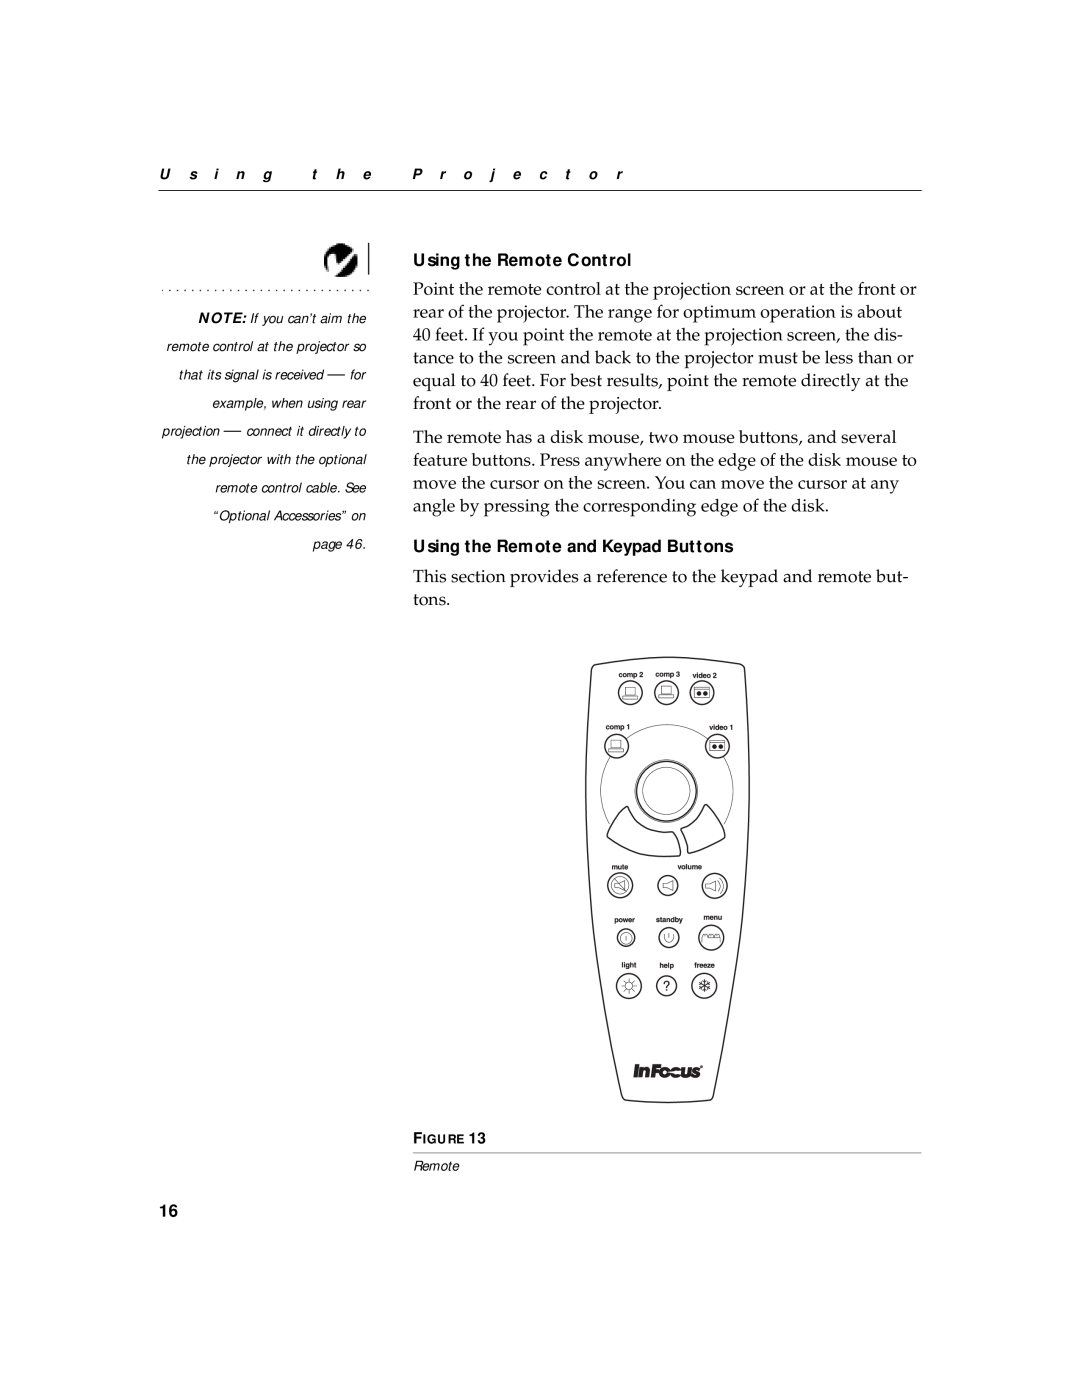 InFocus LS700 warranty Using the Remote Control, Using the Remote and Keypad Buttons 